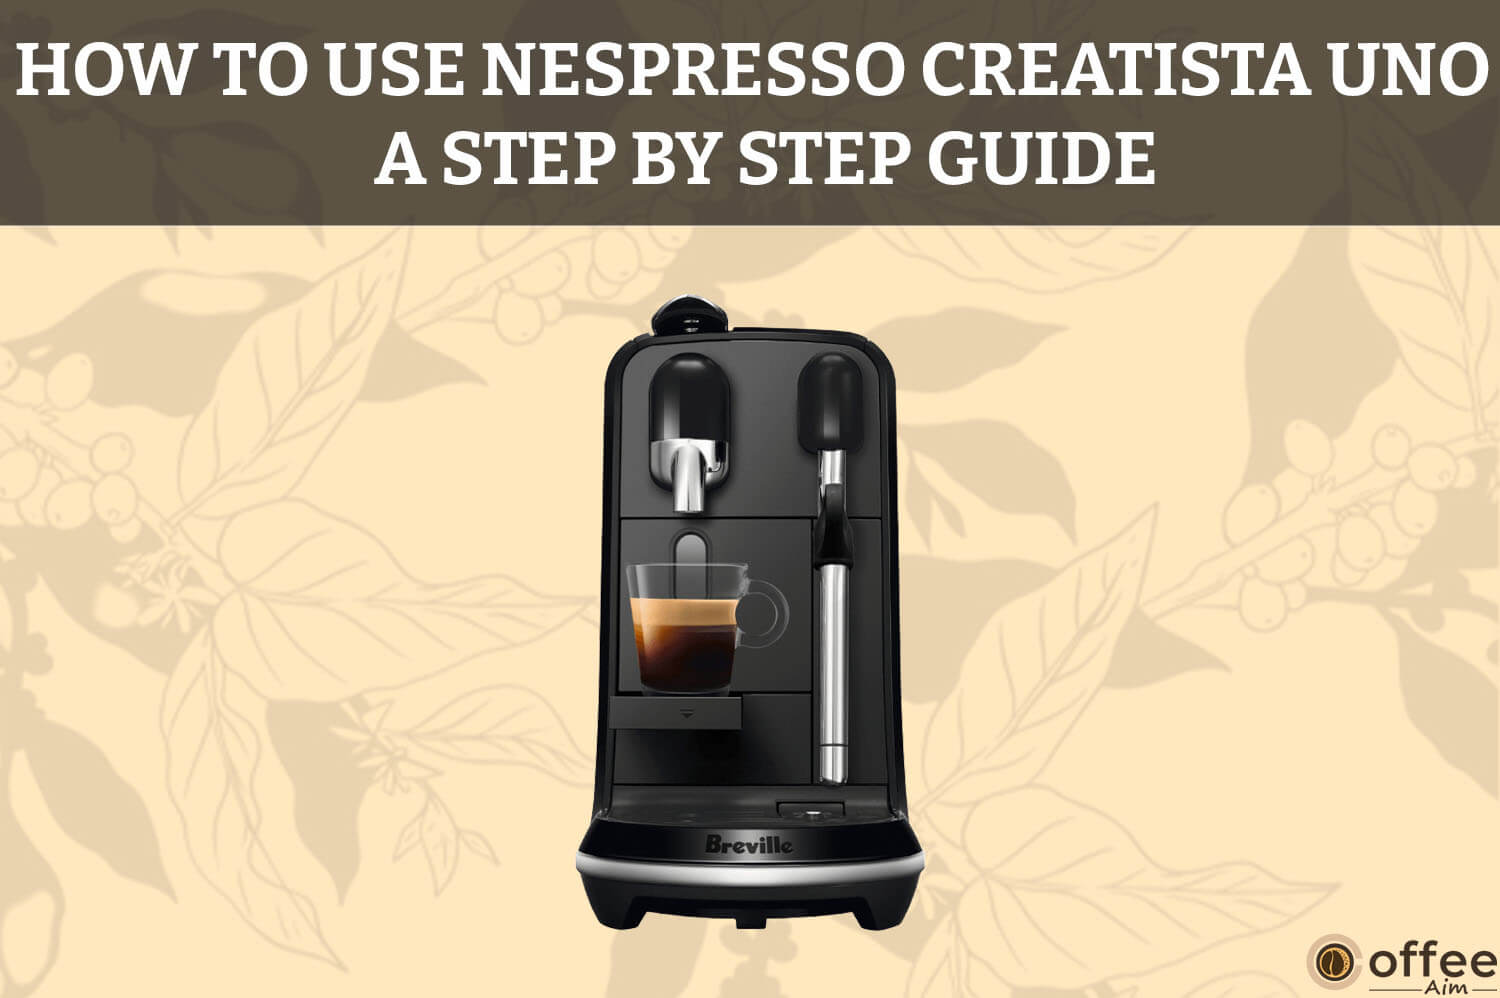 Featured image for the article "How to Use Nespresso Creatista Uno"